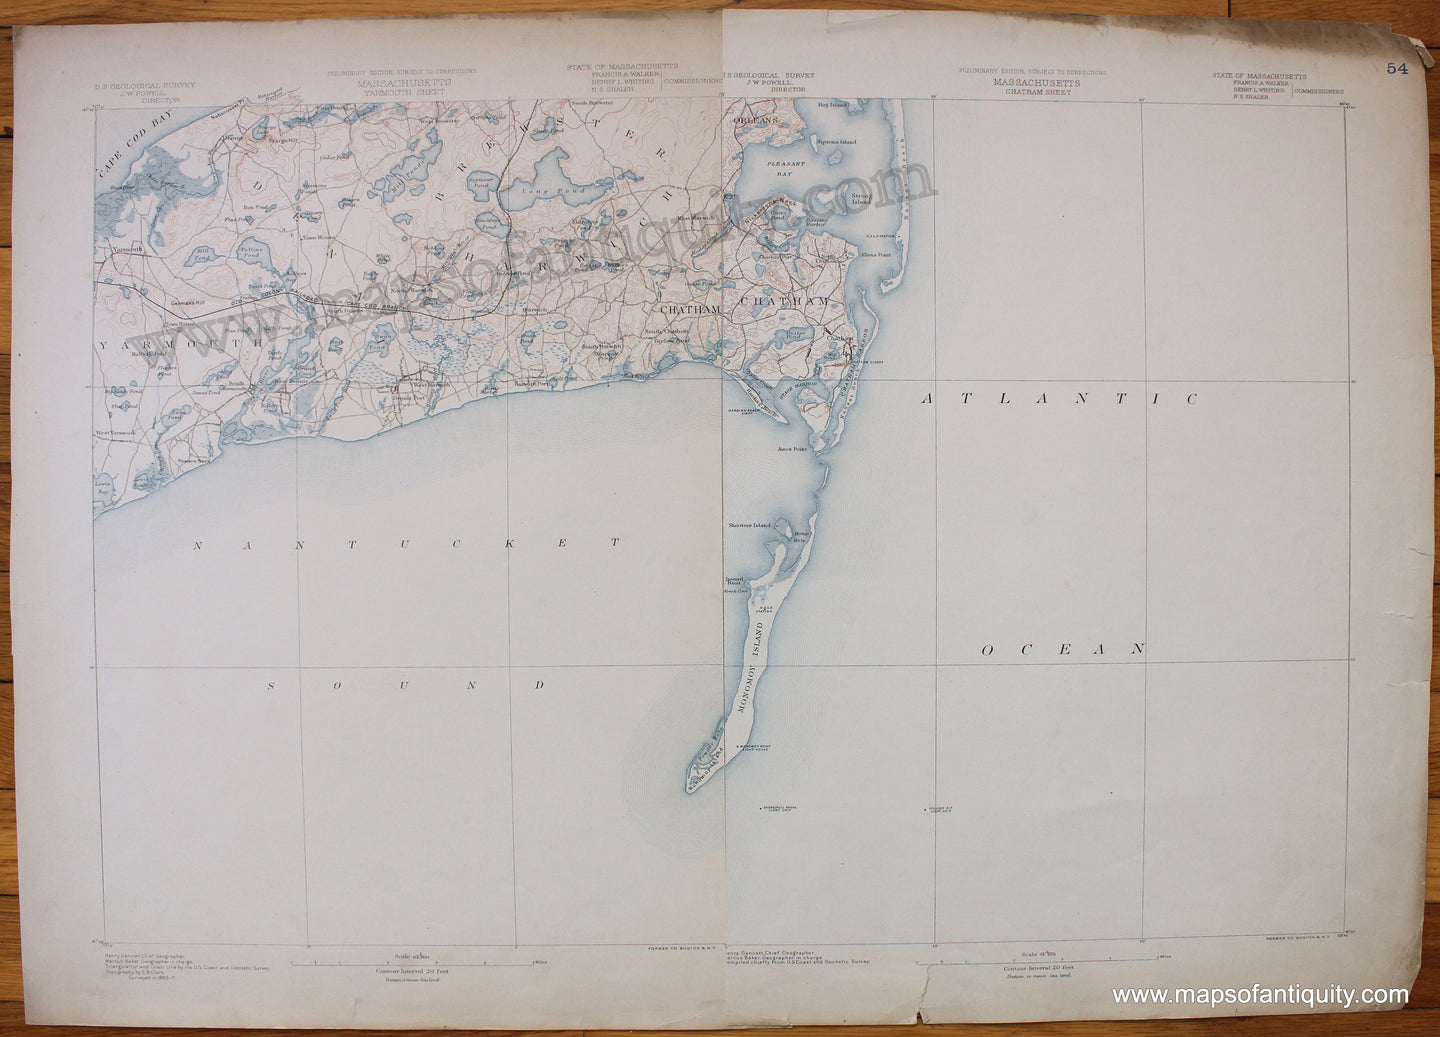 Antique-Topographic-Map-Cape-Cod-Topographic-Maps-of-Harwich-and-Chatham-1890-USGS--1800s-19th-century-Maps-of-Antiquity